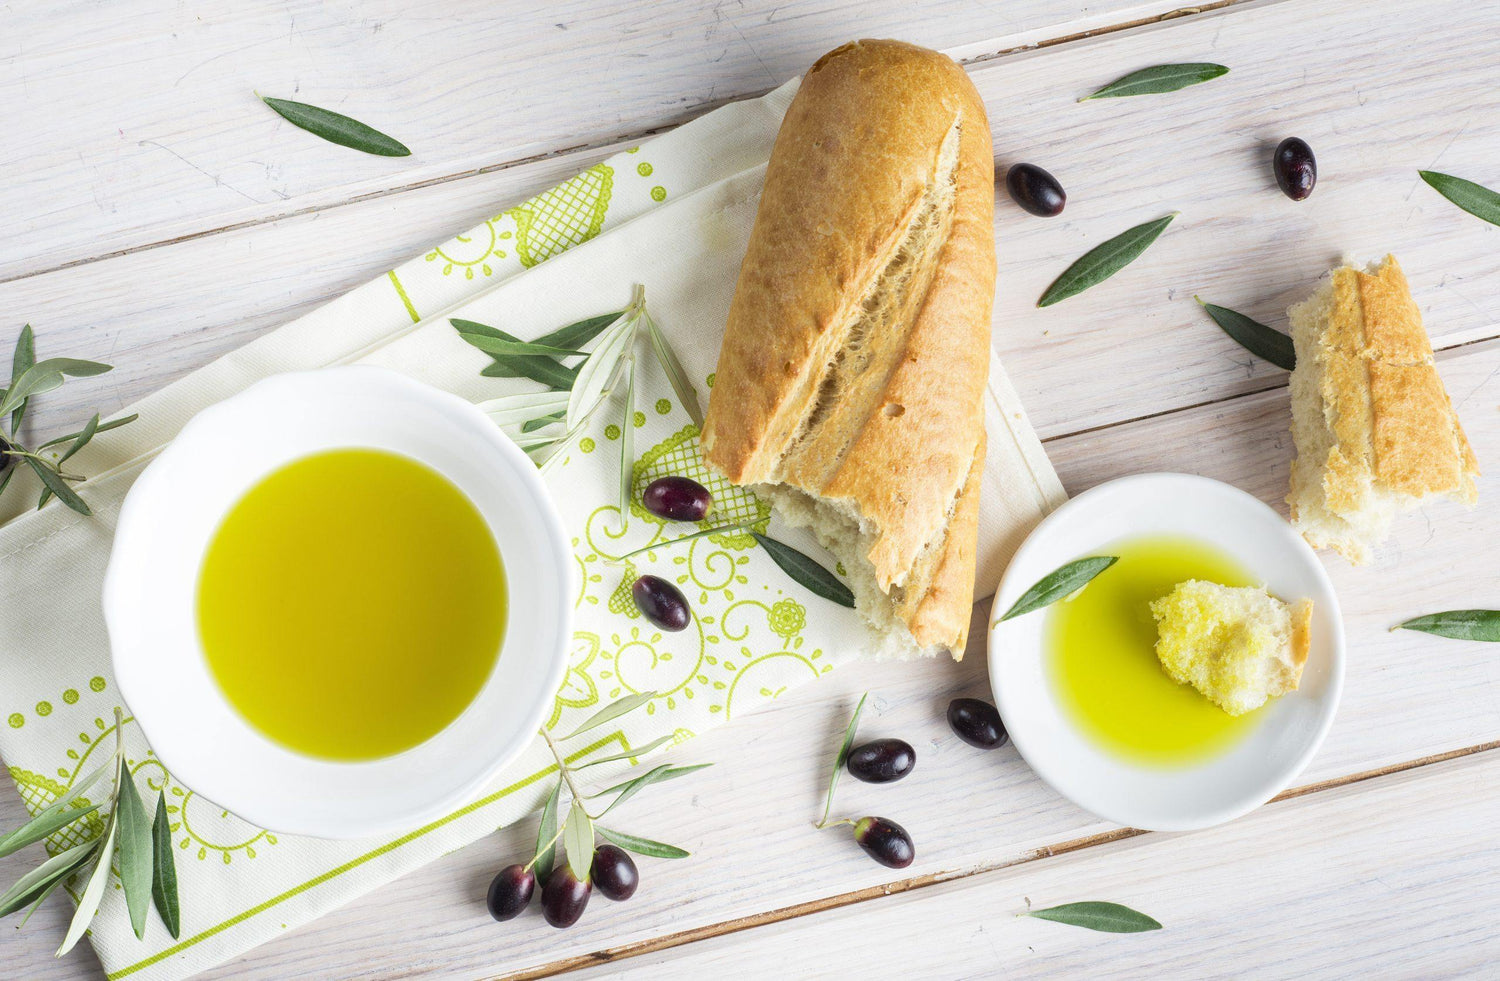 BUTTER OLIVE OIL - SISILOLASPICES